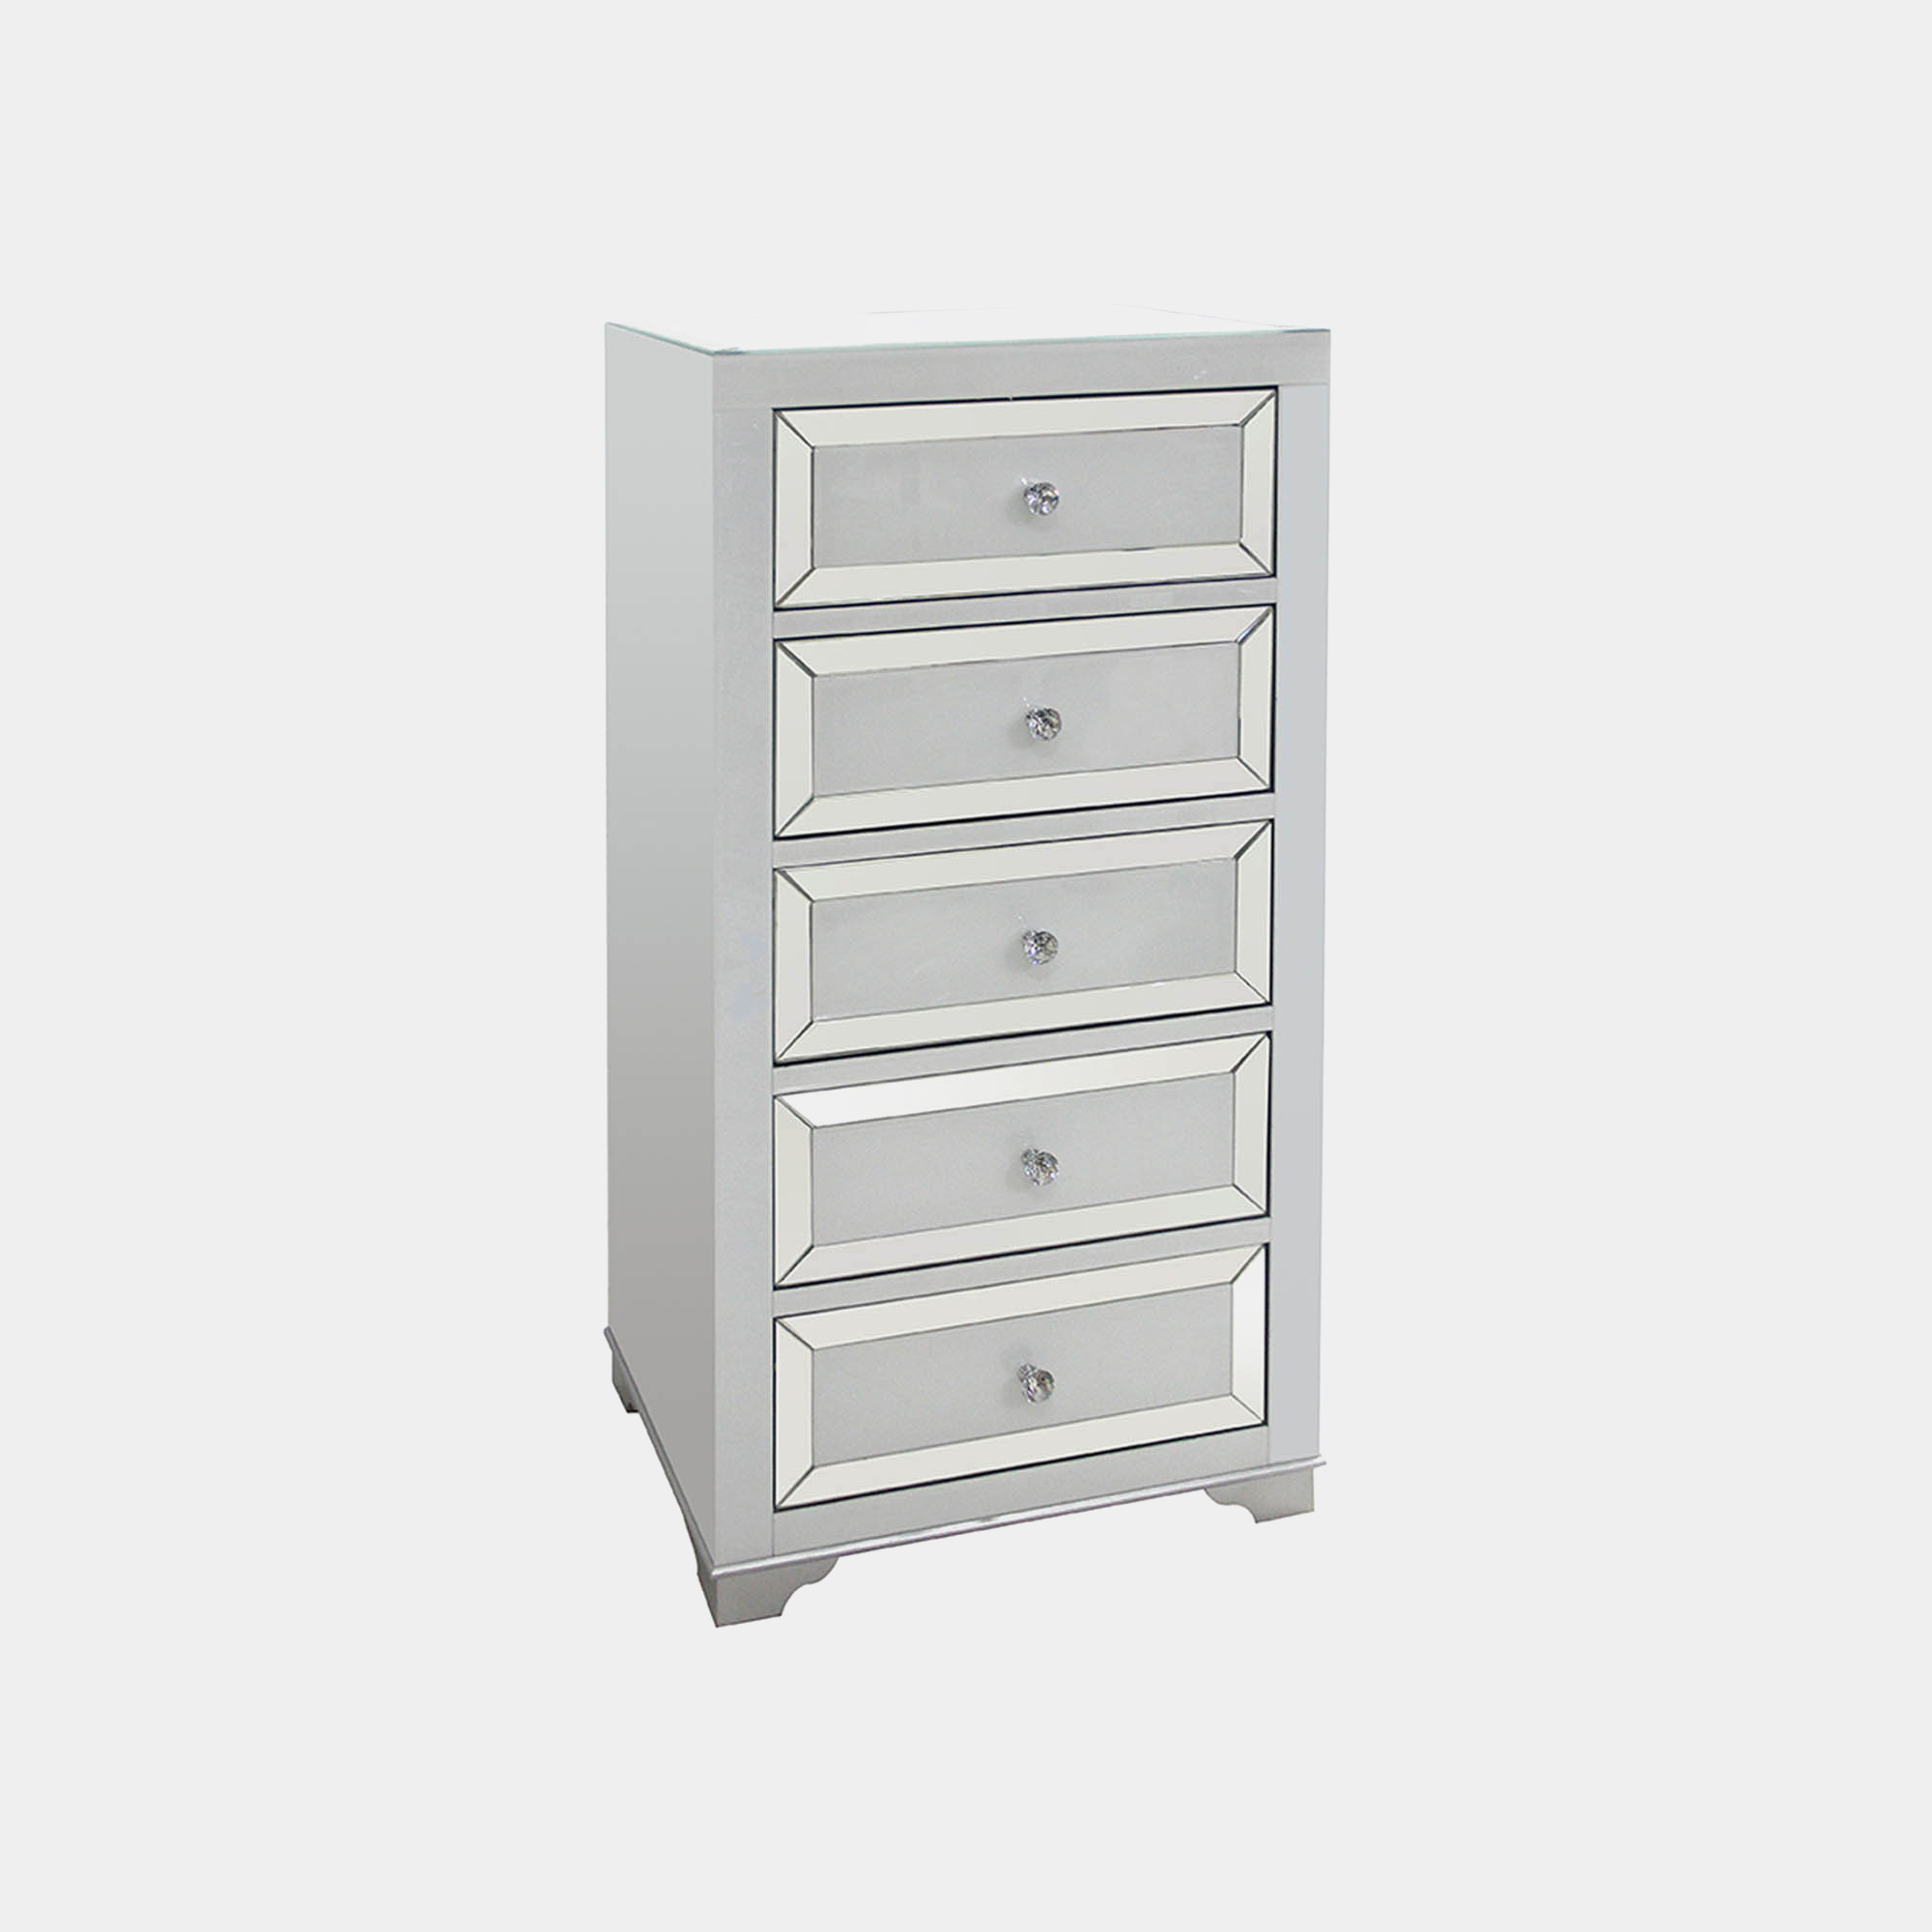 Bianca 5 Drawer Tall Boy Mirrored Silver White Bedroom